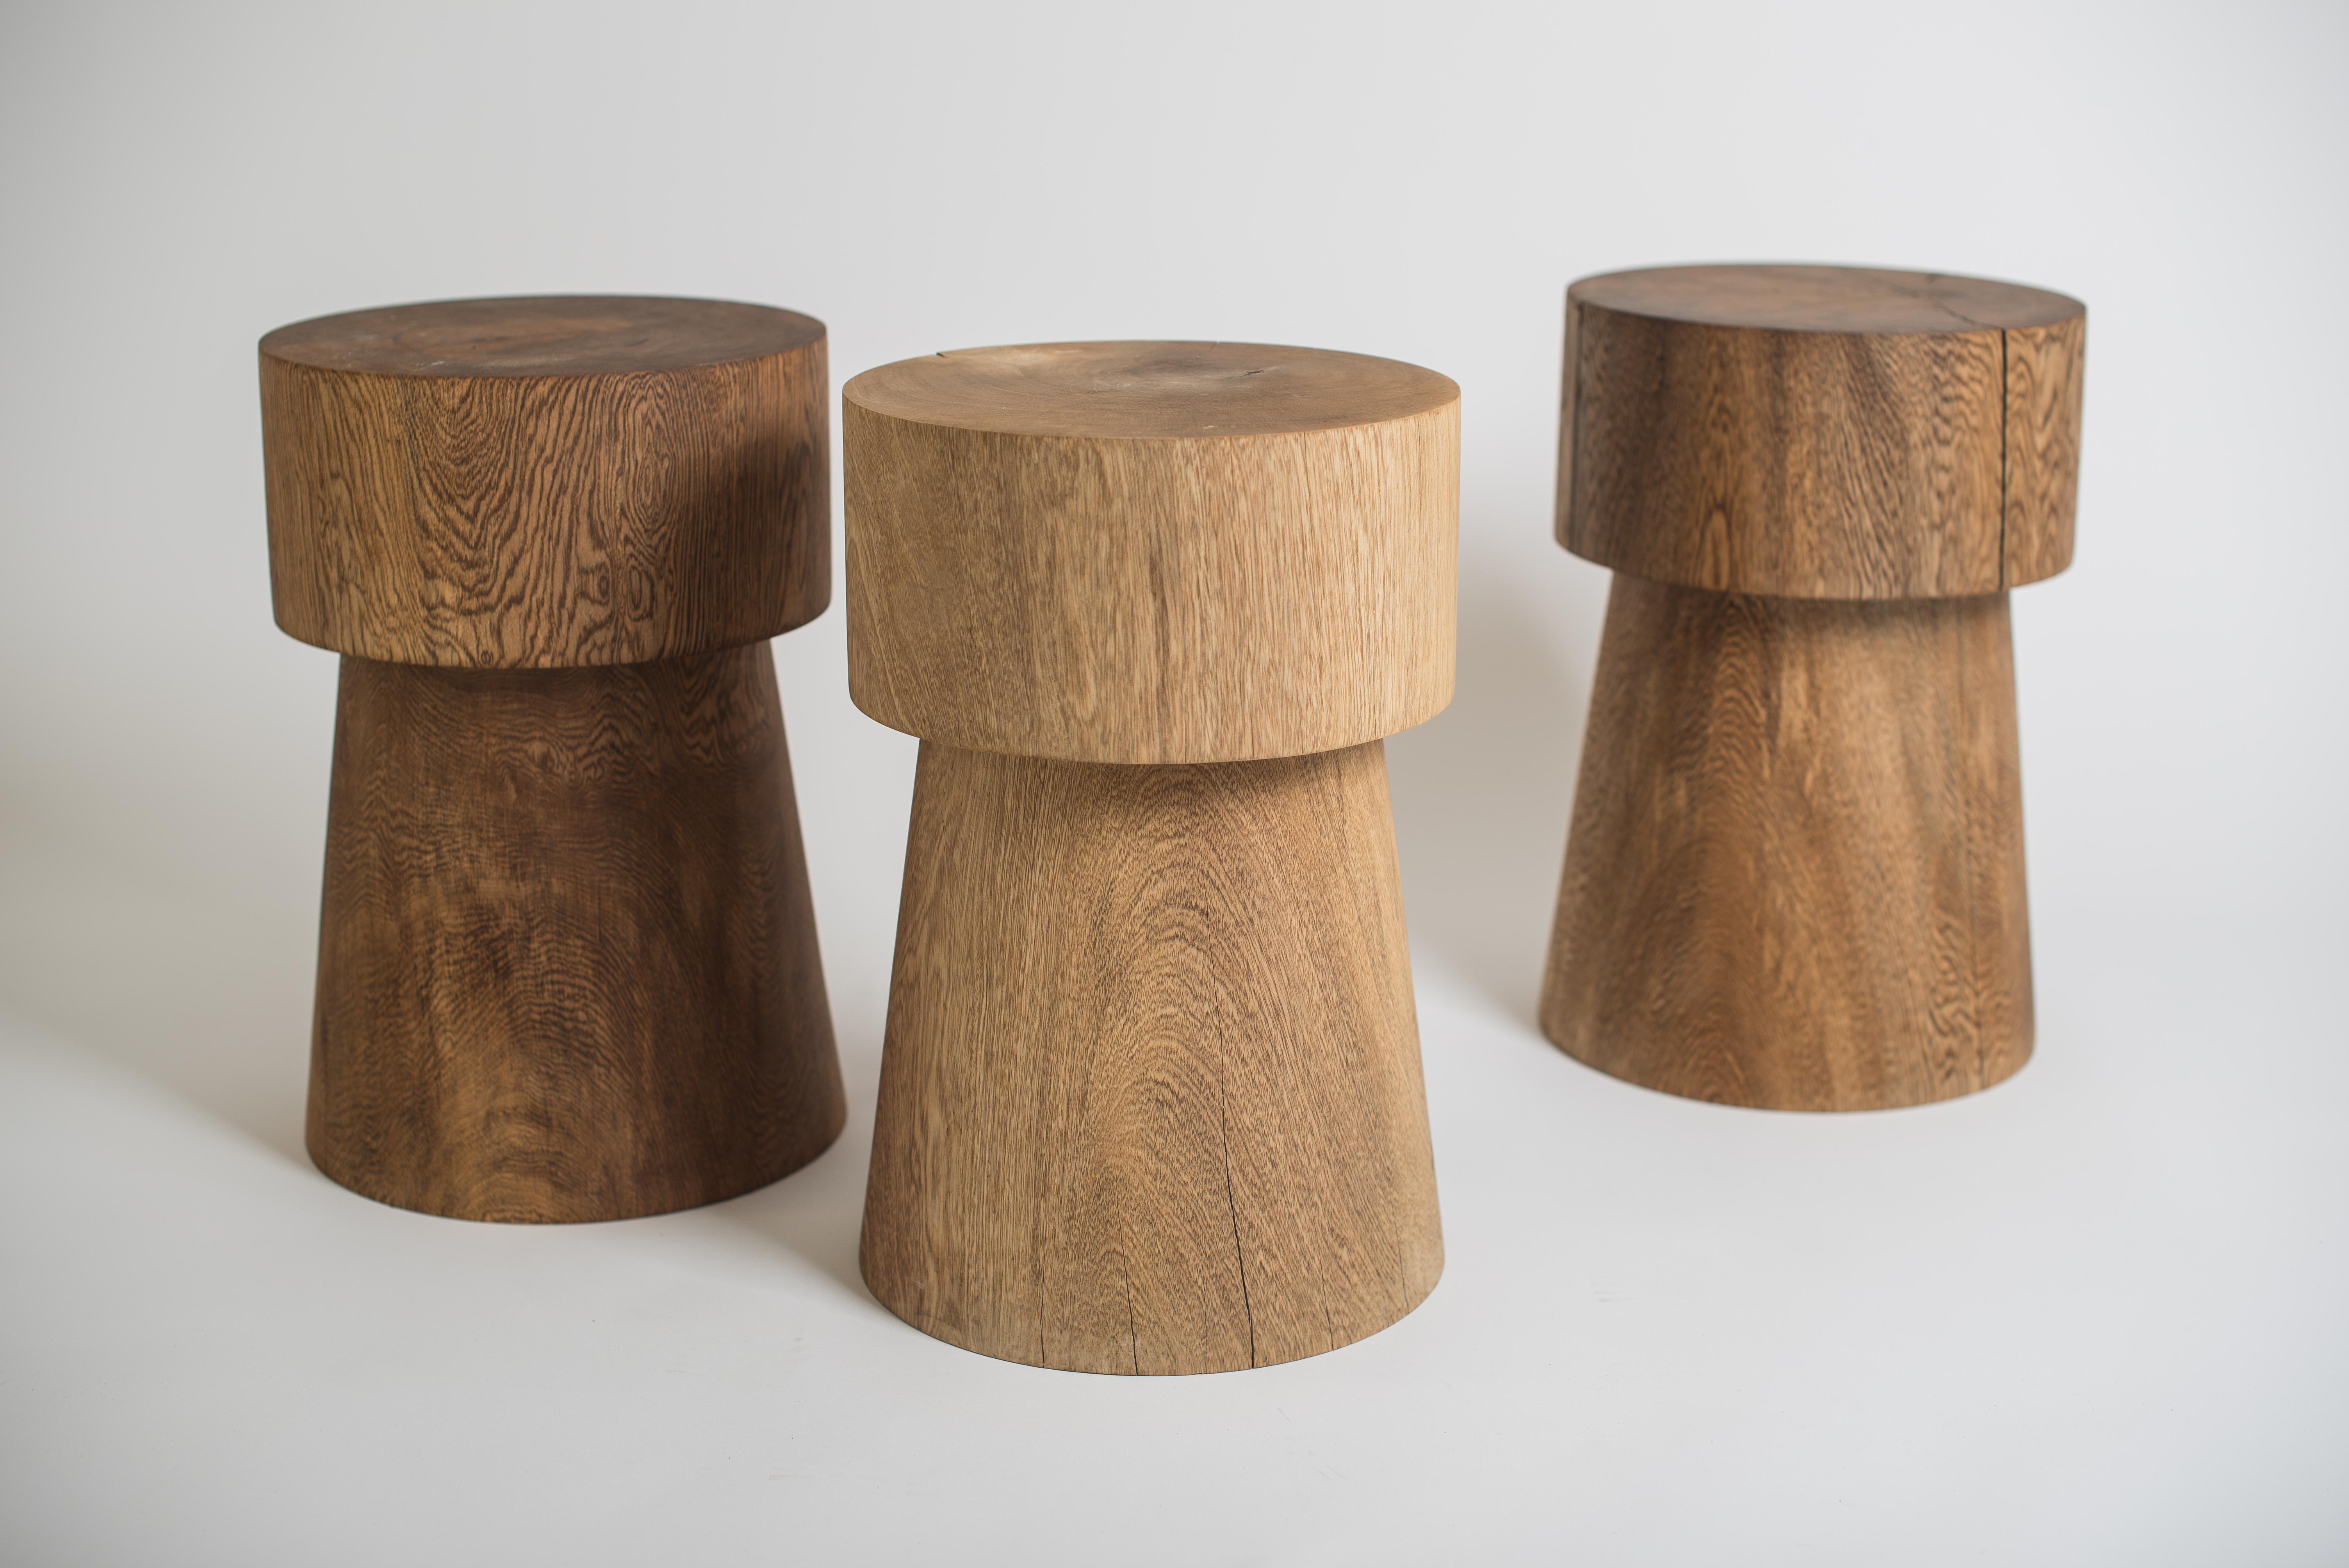 Potro Stools are inspired by the sturdy anatomy of horses and their role in Mexican culture. 

The stools are woodturned in highly resistant amapa wood, by the Ramírez Family in San Juan de Abajo, Nayarit; using certified local solid wood.

Potro